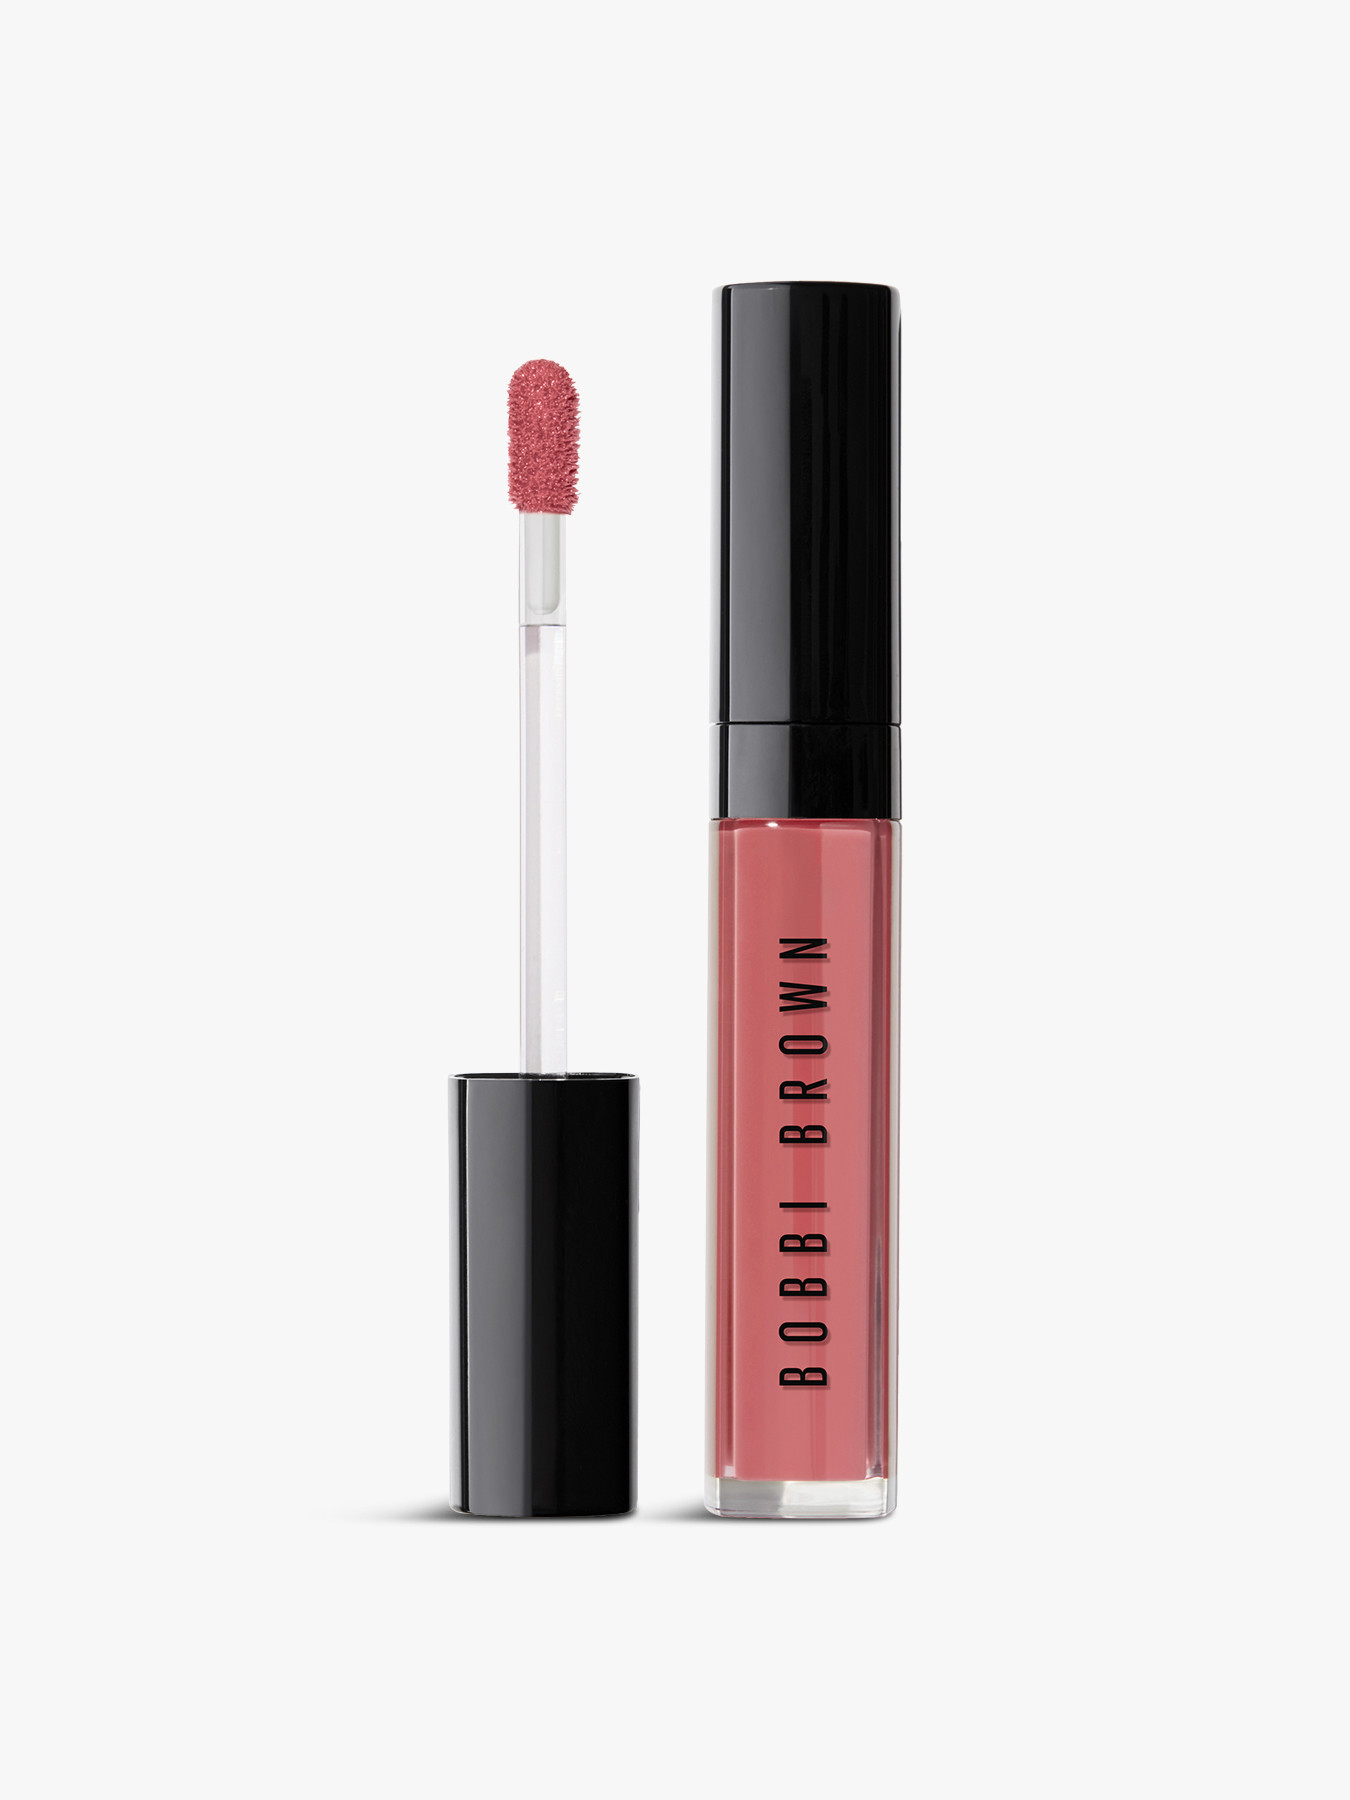 Bobbi Brown Crushed Oil-infused Gloss New Romantic